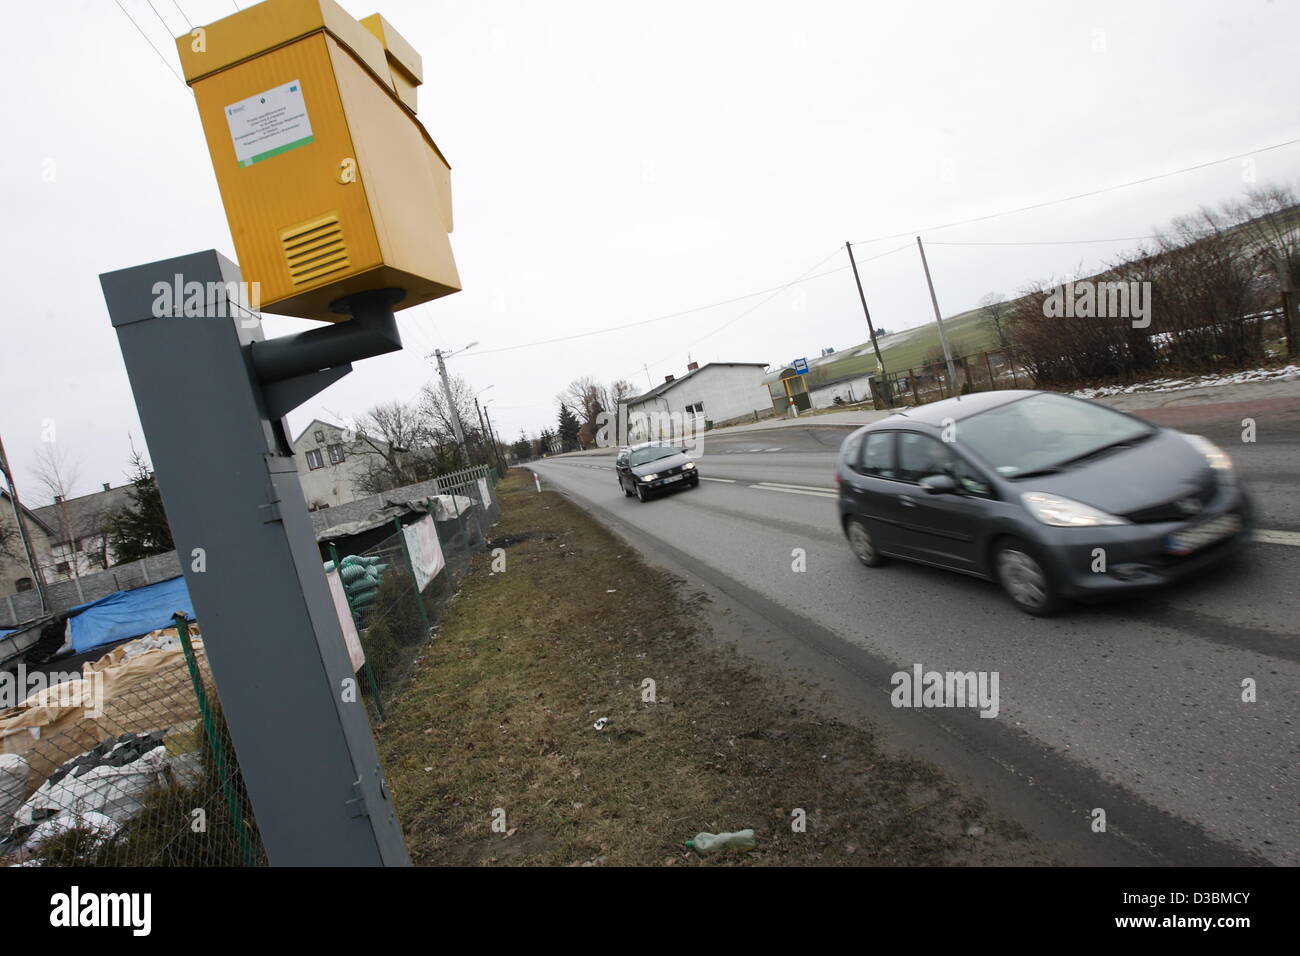 Baldram, Poland 15th, Fenruary 2013 Polish government has announced a new drive to cut the over 3,500 deaths a year on Polish roads , one of the worst road safety records in the EU , which includes placing more radar speed cameras at accident black spots. Pictured : new speed camera in village of Baldarm, Central Poland Stock Photo